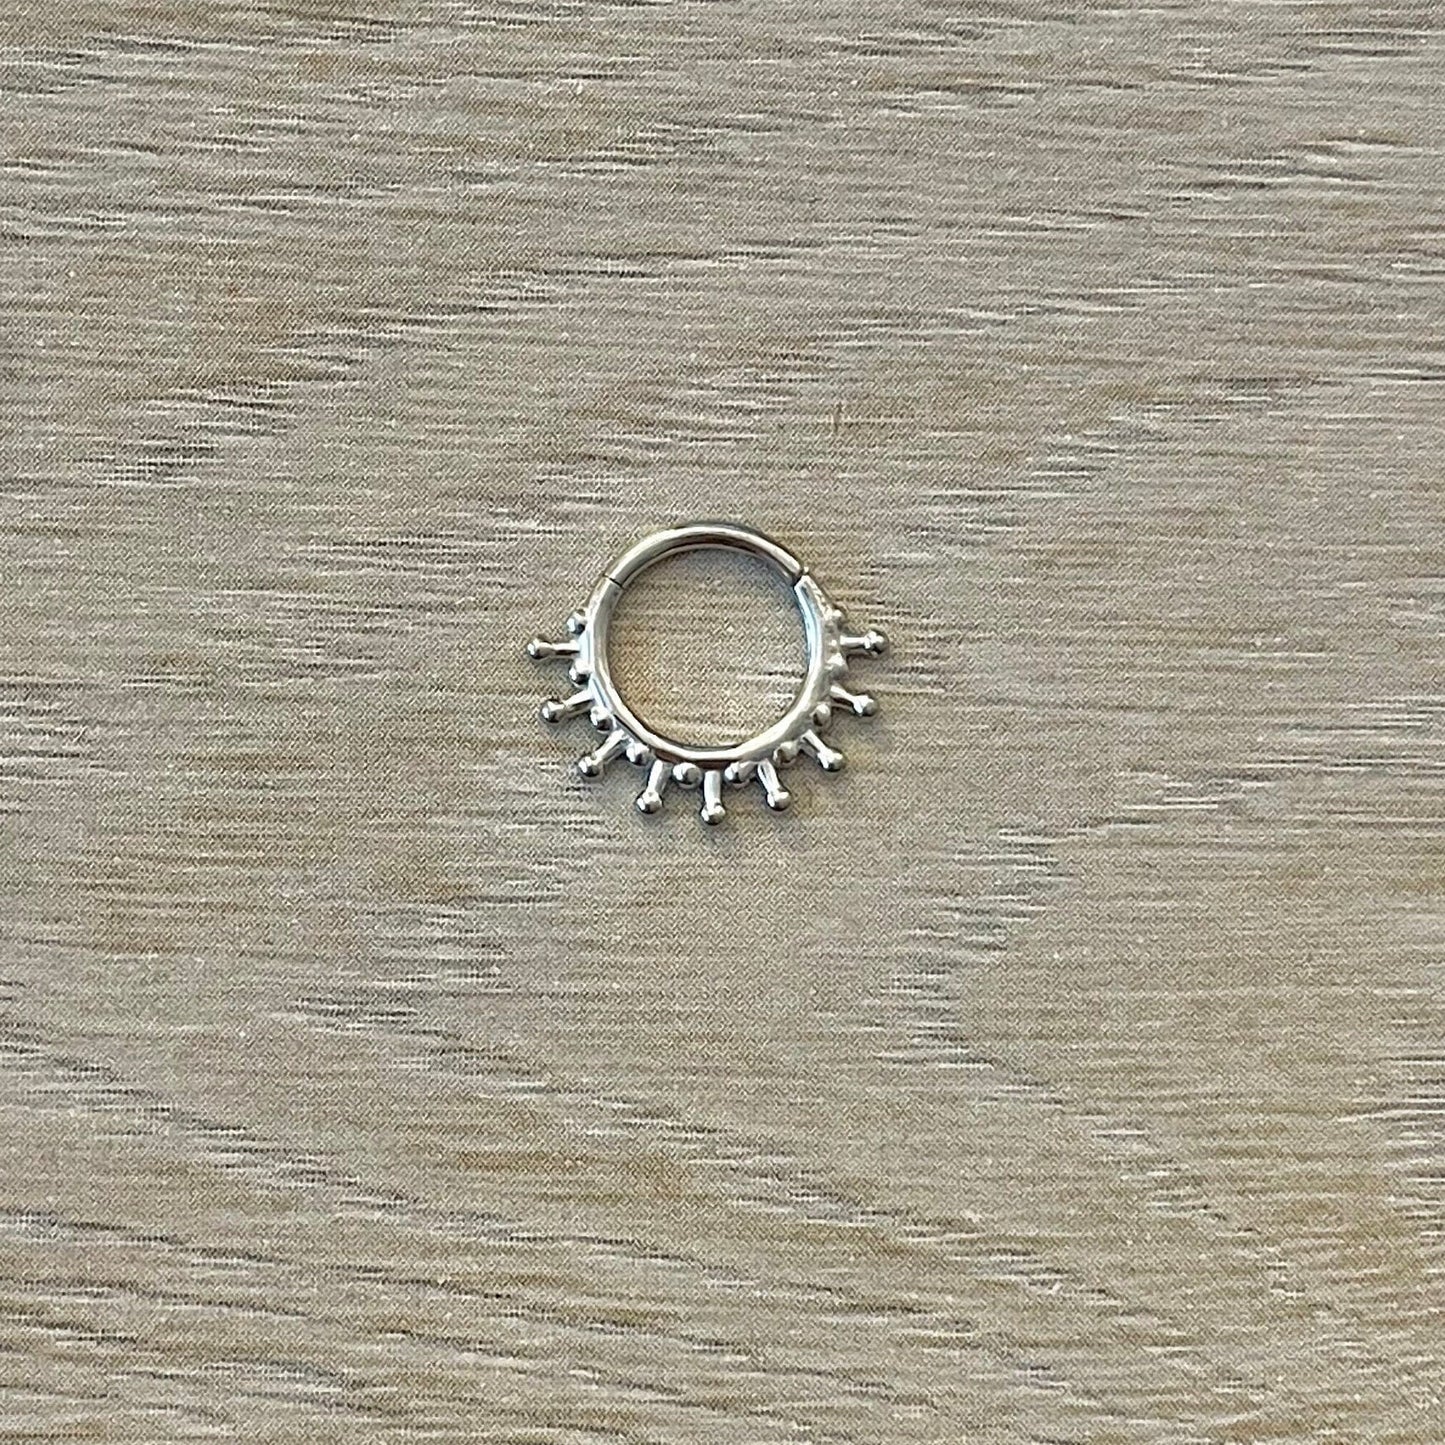 Silver Sunburst Daith Earring (16G | 8mm or 10mm | Surgical Steel | Gold, Silver, or Black)